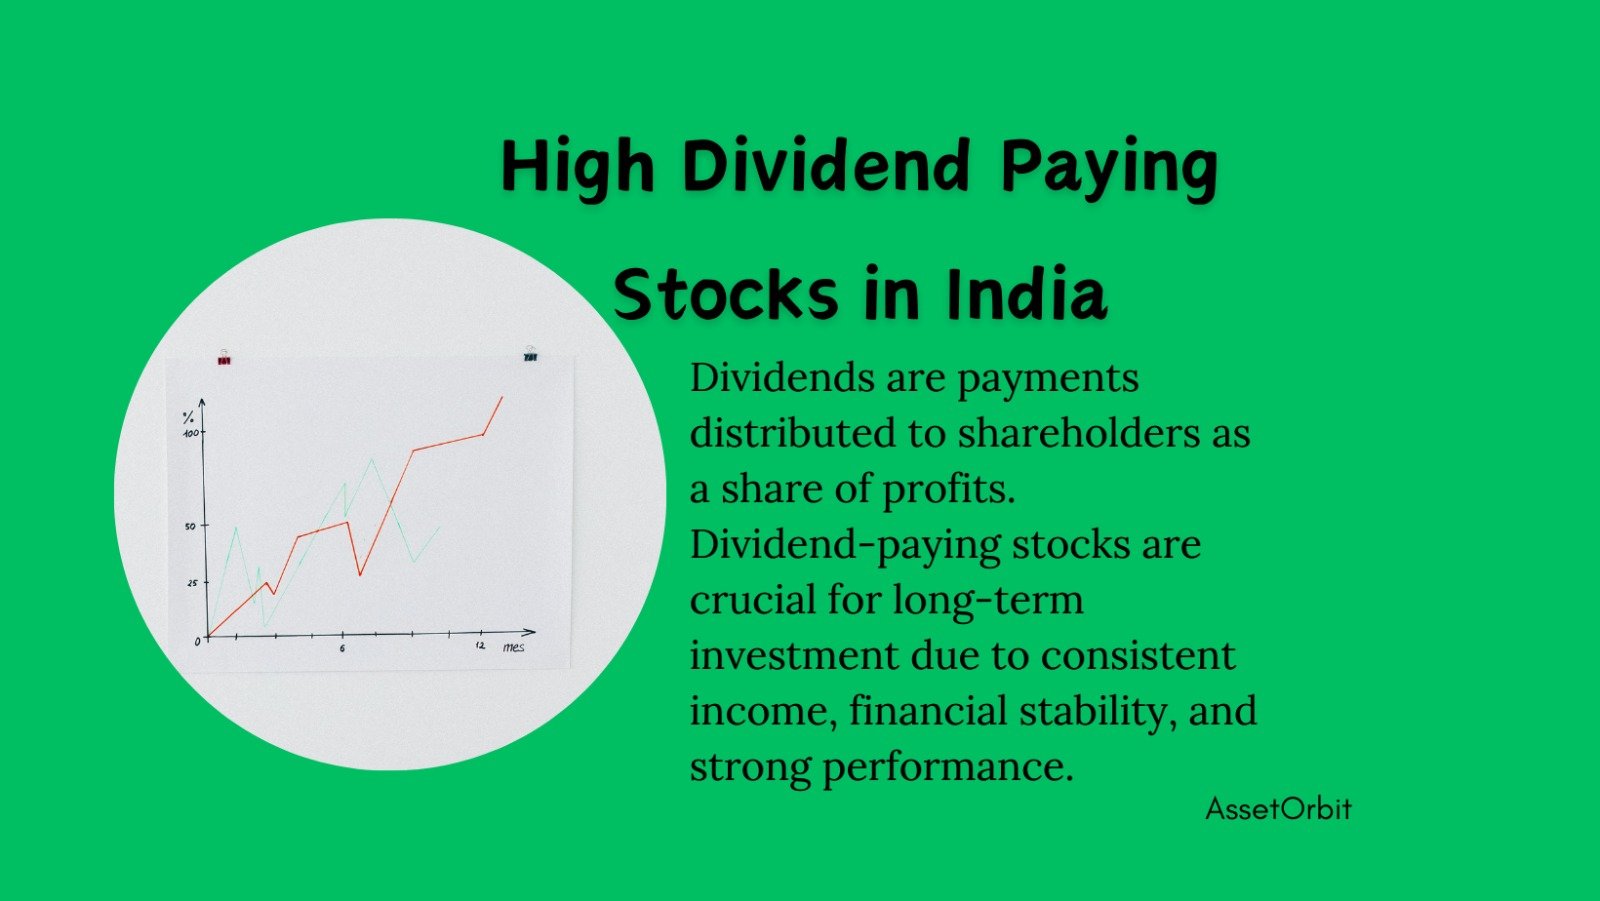 High Dividend Paying Stocks in India